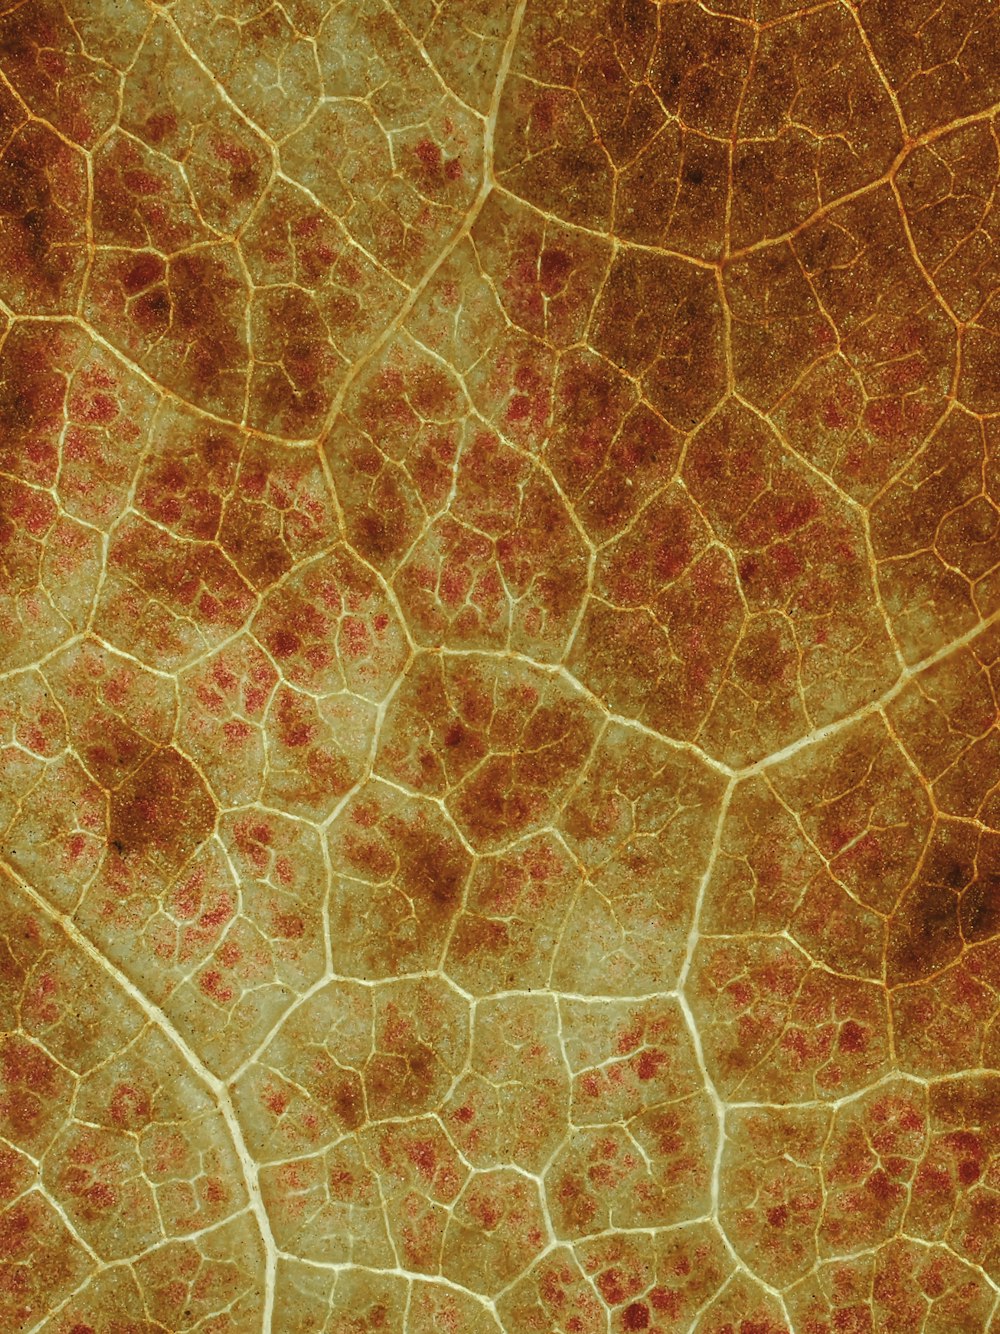 a close up of a leaf with red spots